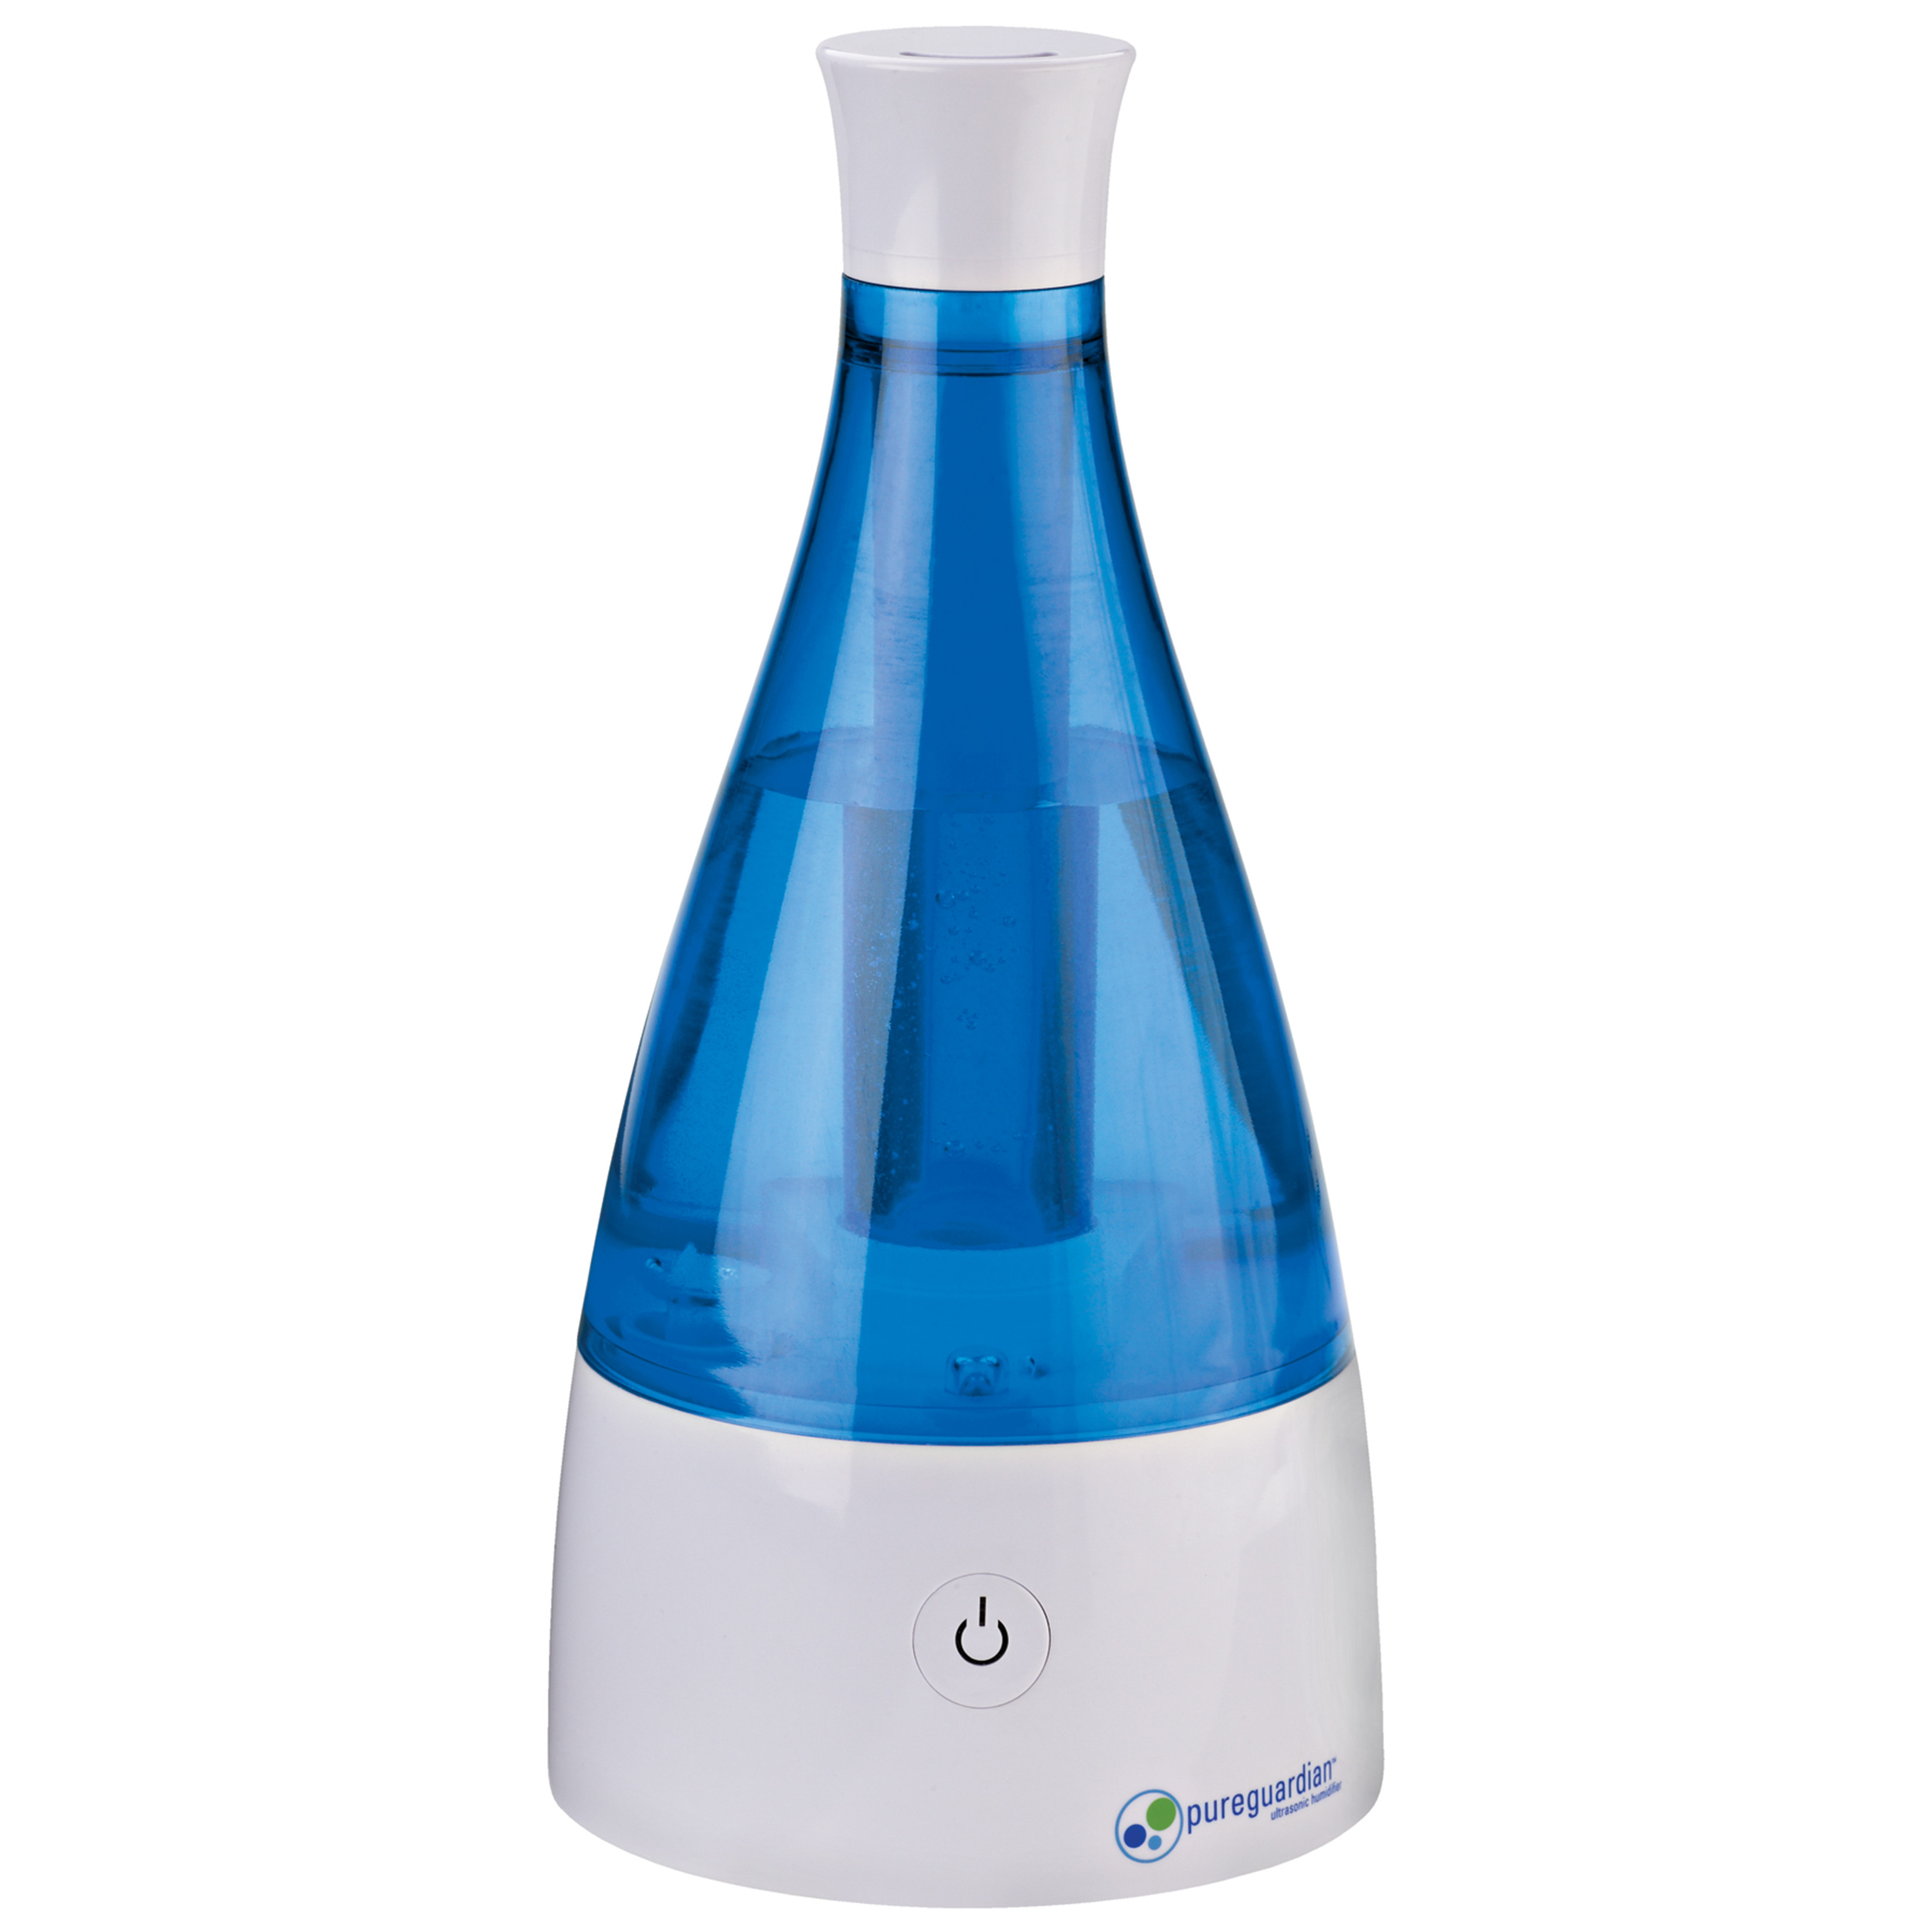 PureGuardian 210 sq. ft. 0.21 Gallon Cool Mist Ultrasonic Humidifier with Night Light, H920BL - image 1 of 10